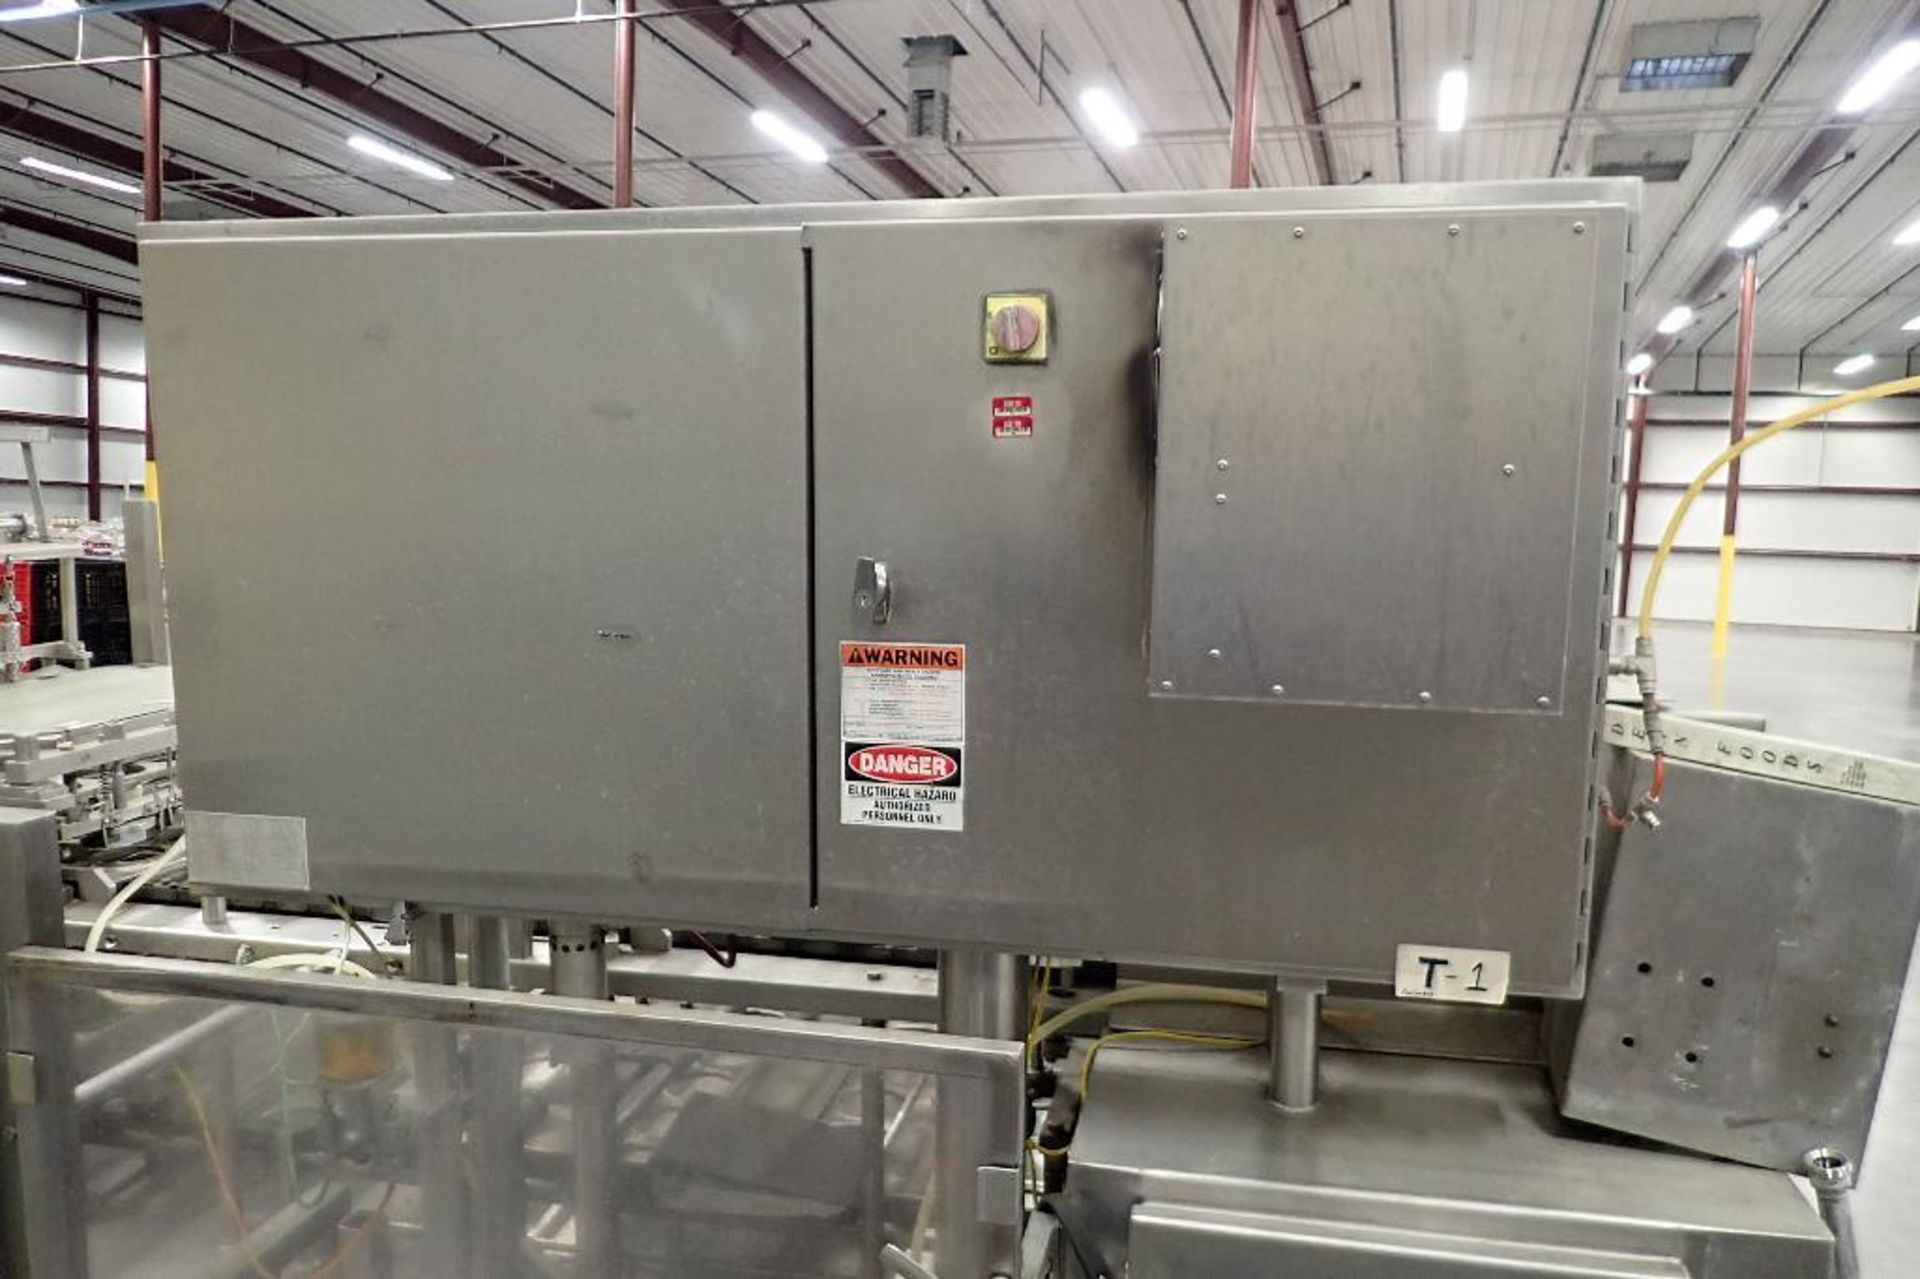 Osgood automatic 8-line double-index cup filler, model 8120, s/n 29338, job number 29-338, with cont - Image 18 of 18